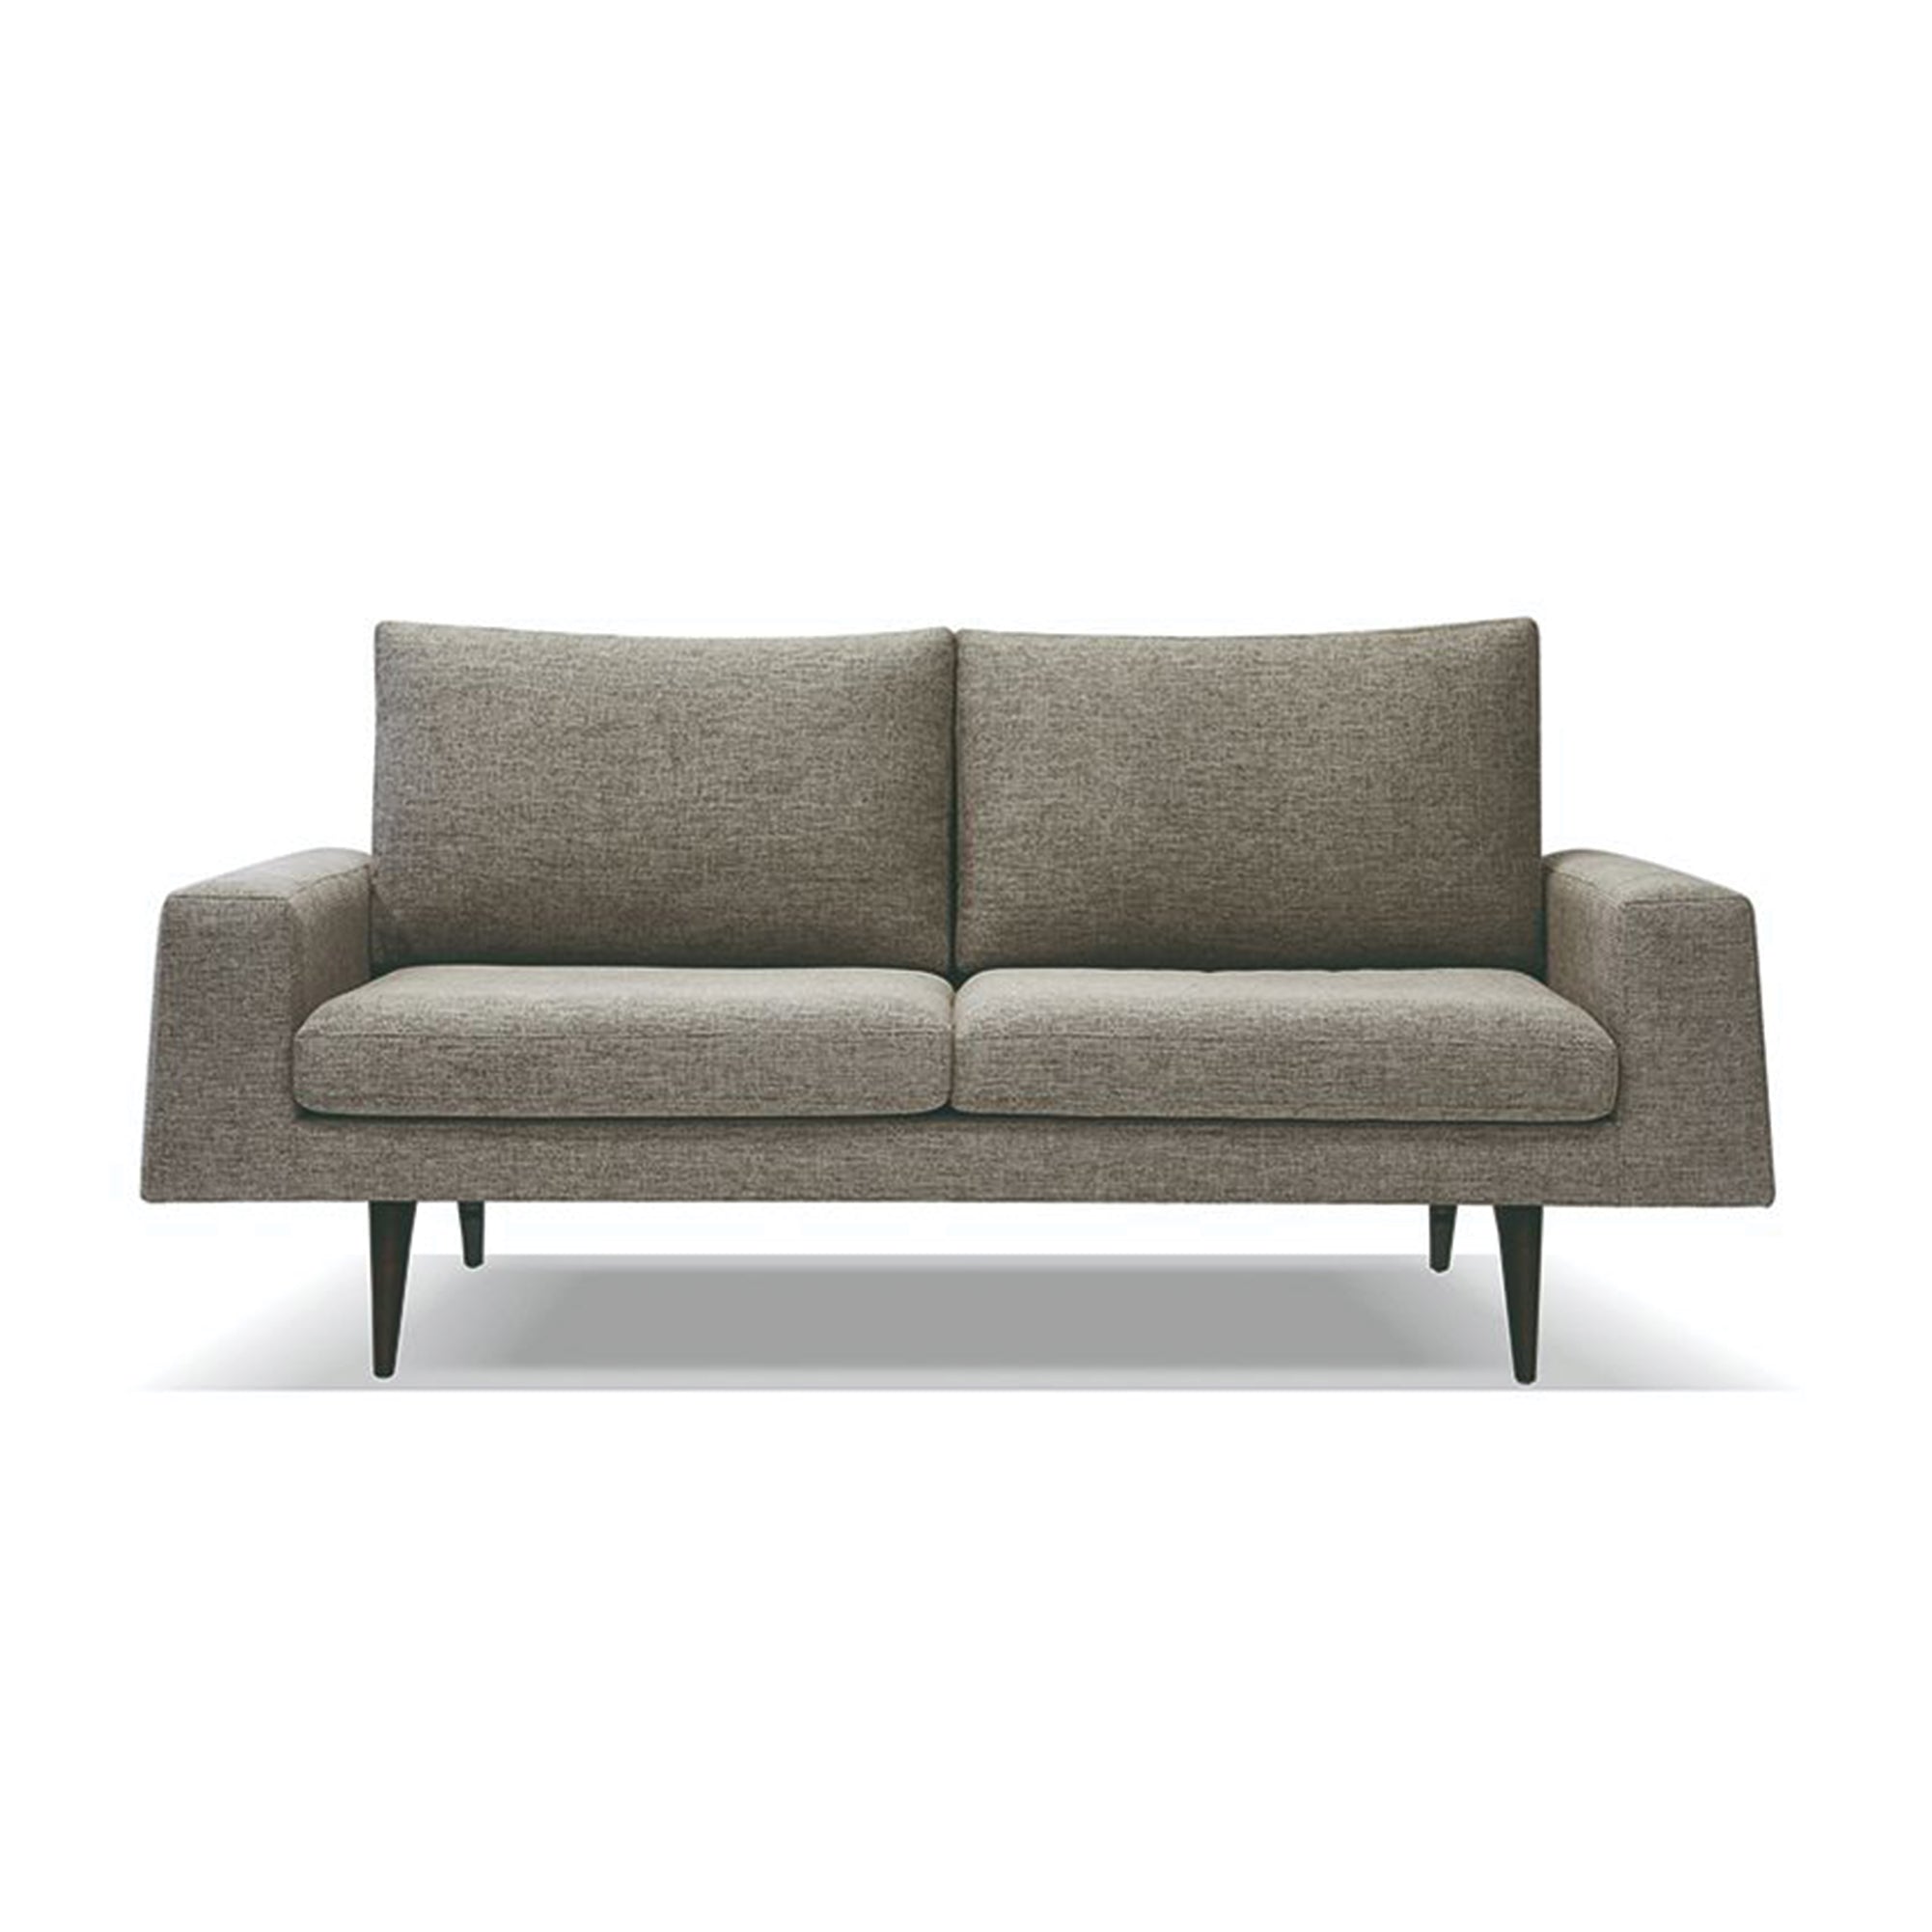 Matteo 2 Seater Couch